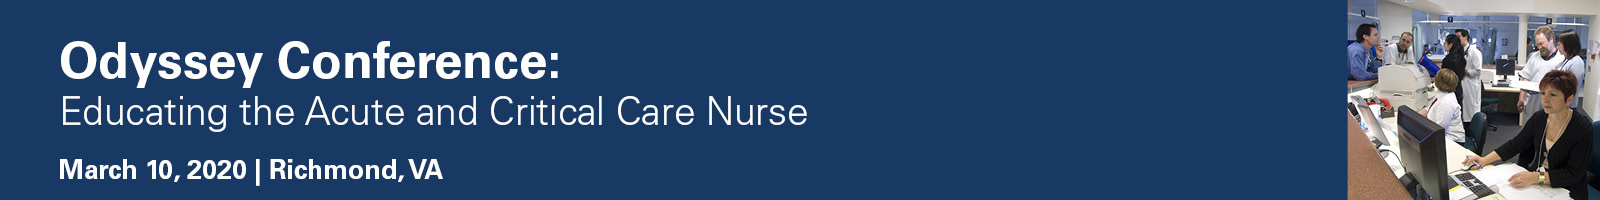 2020 Odyssey Conference: Educating the Acute and Critical Care Nurse Banner